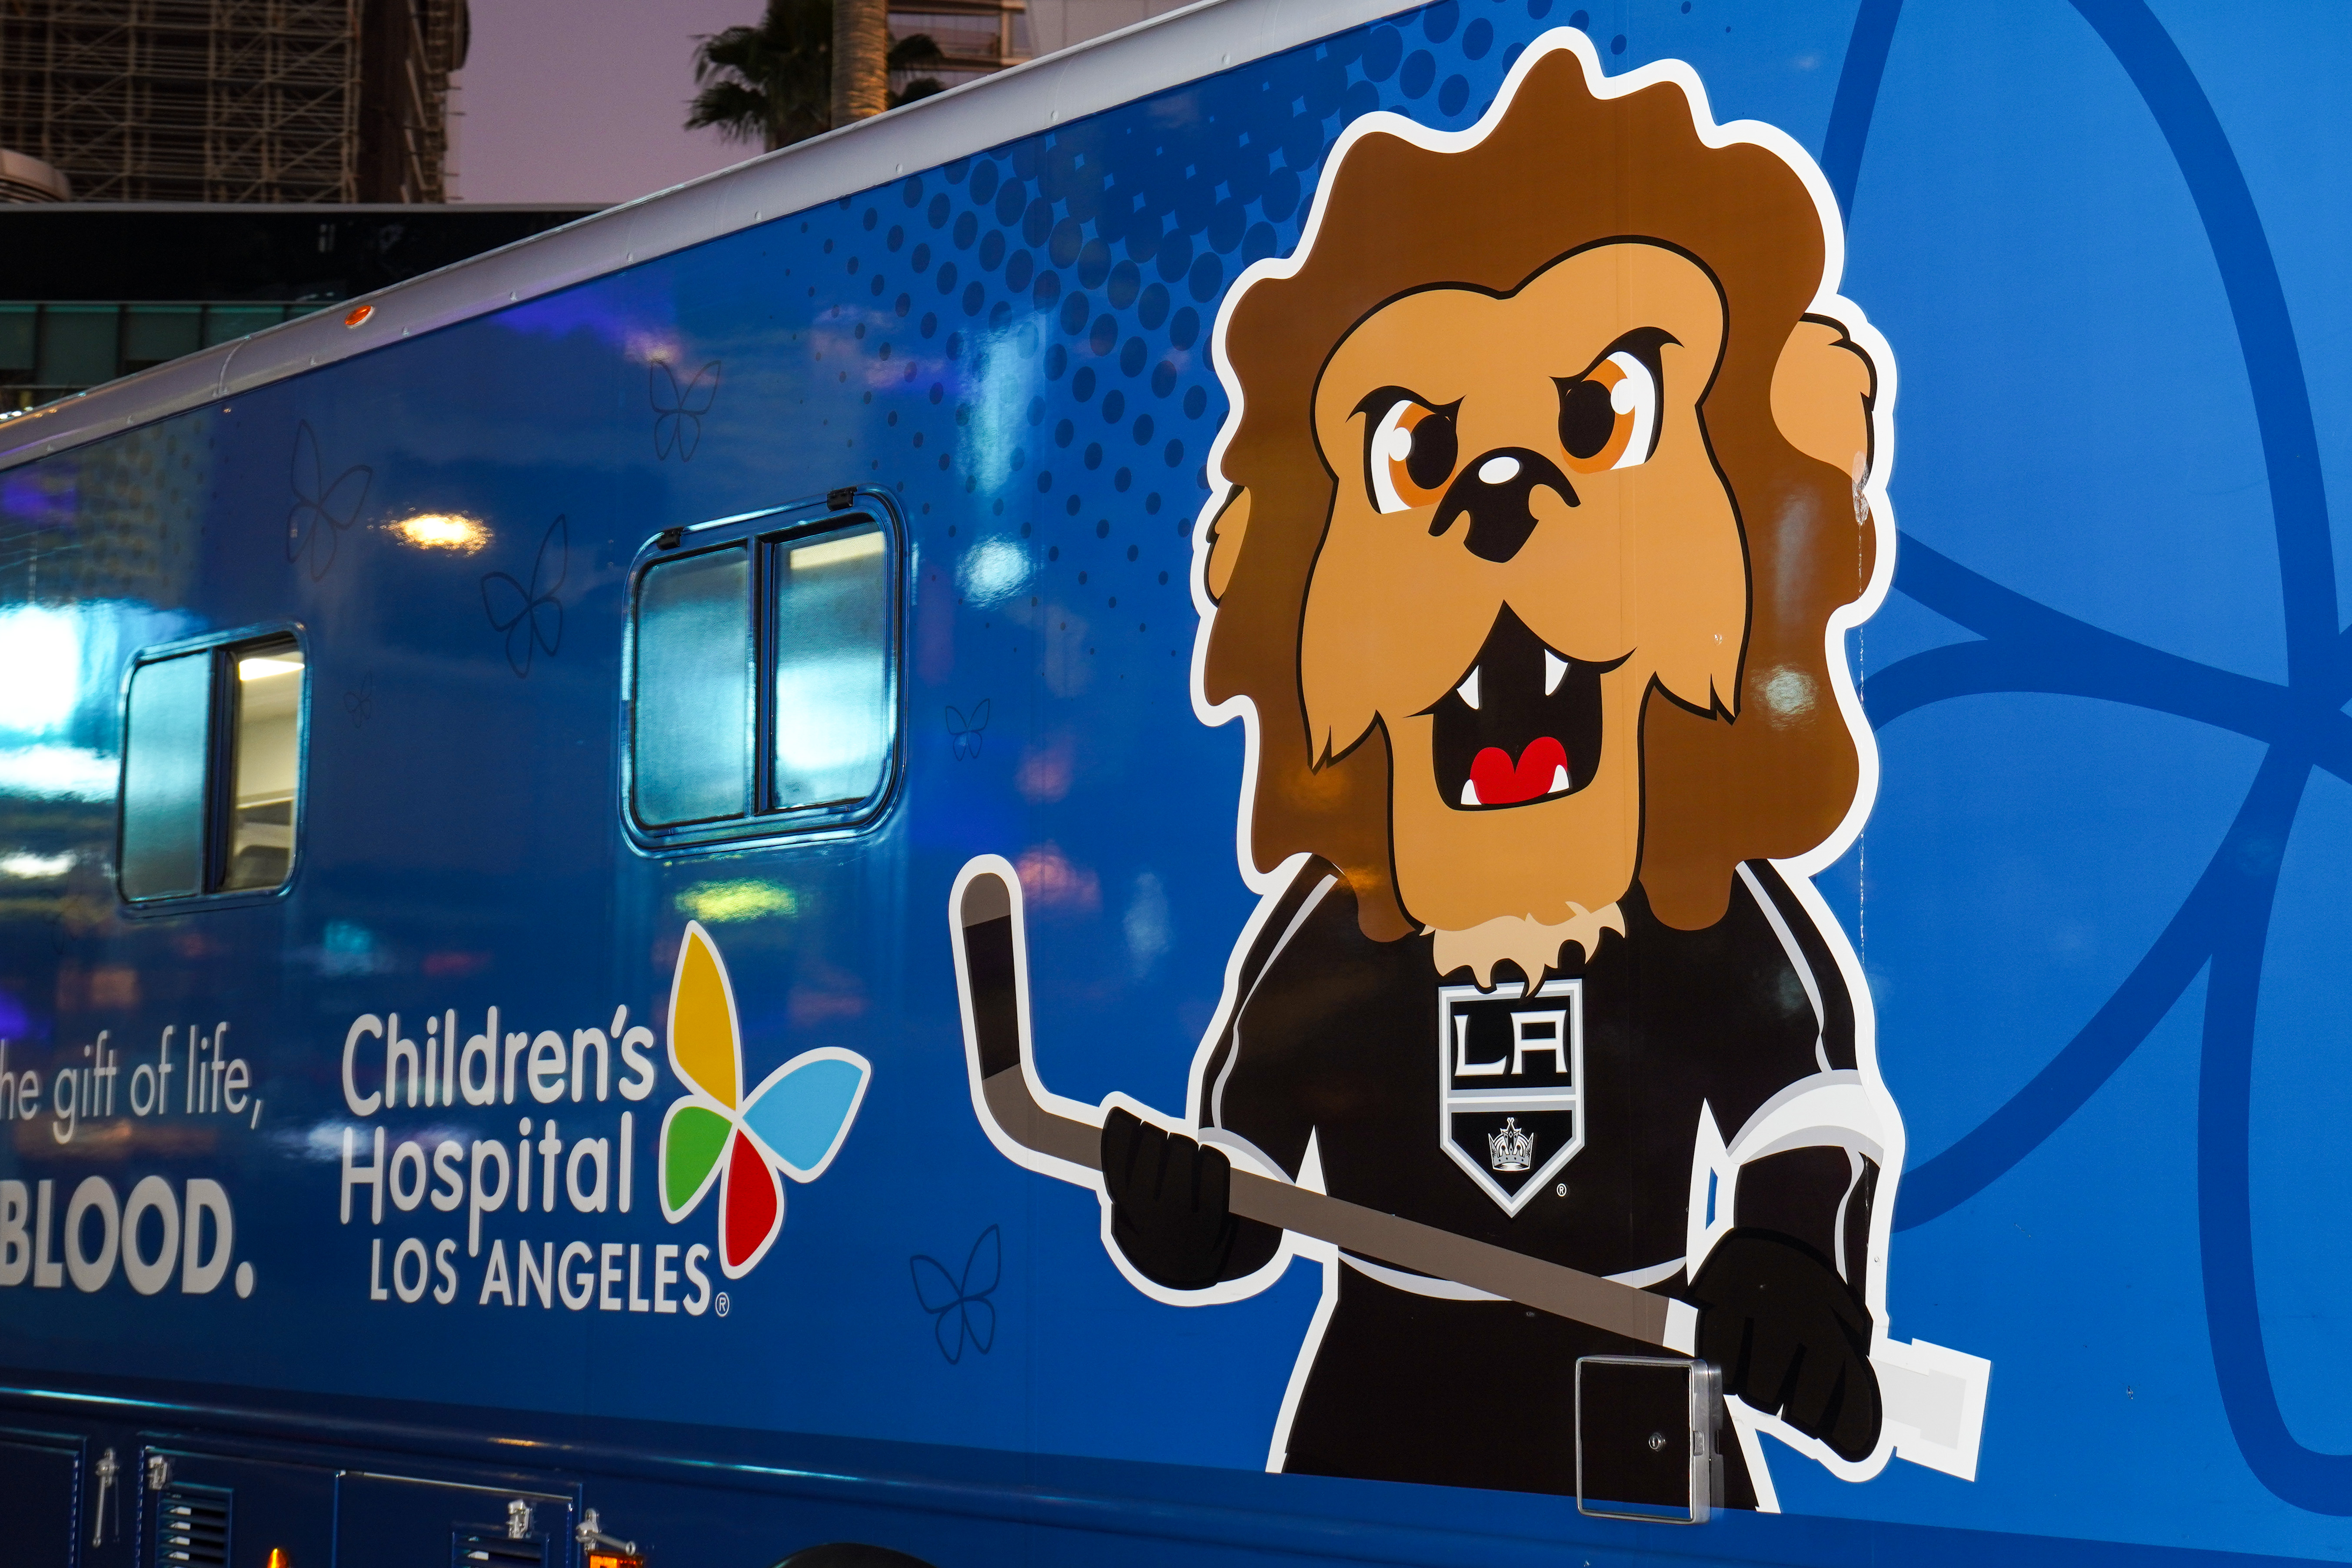 The LA Kings Blood Mobile in conjunction with Children's Hospital Los Angeles.